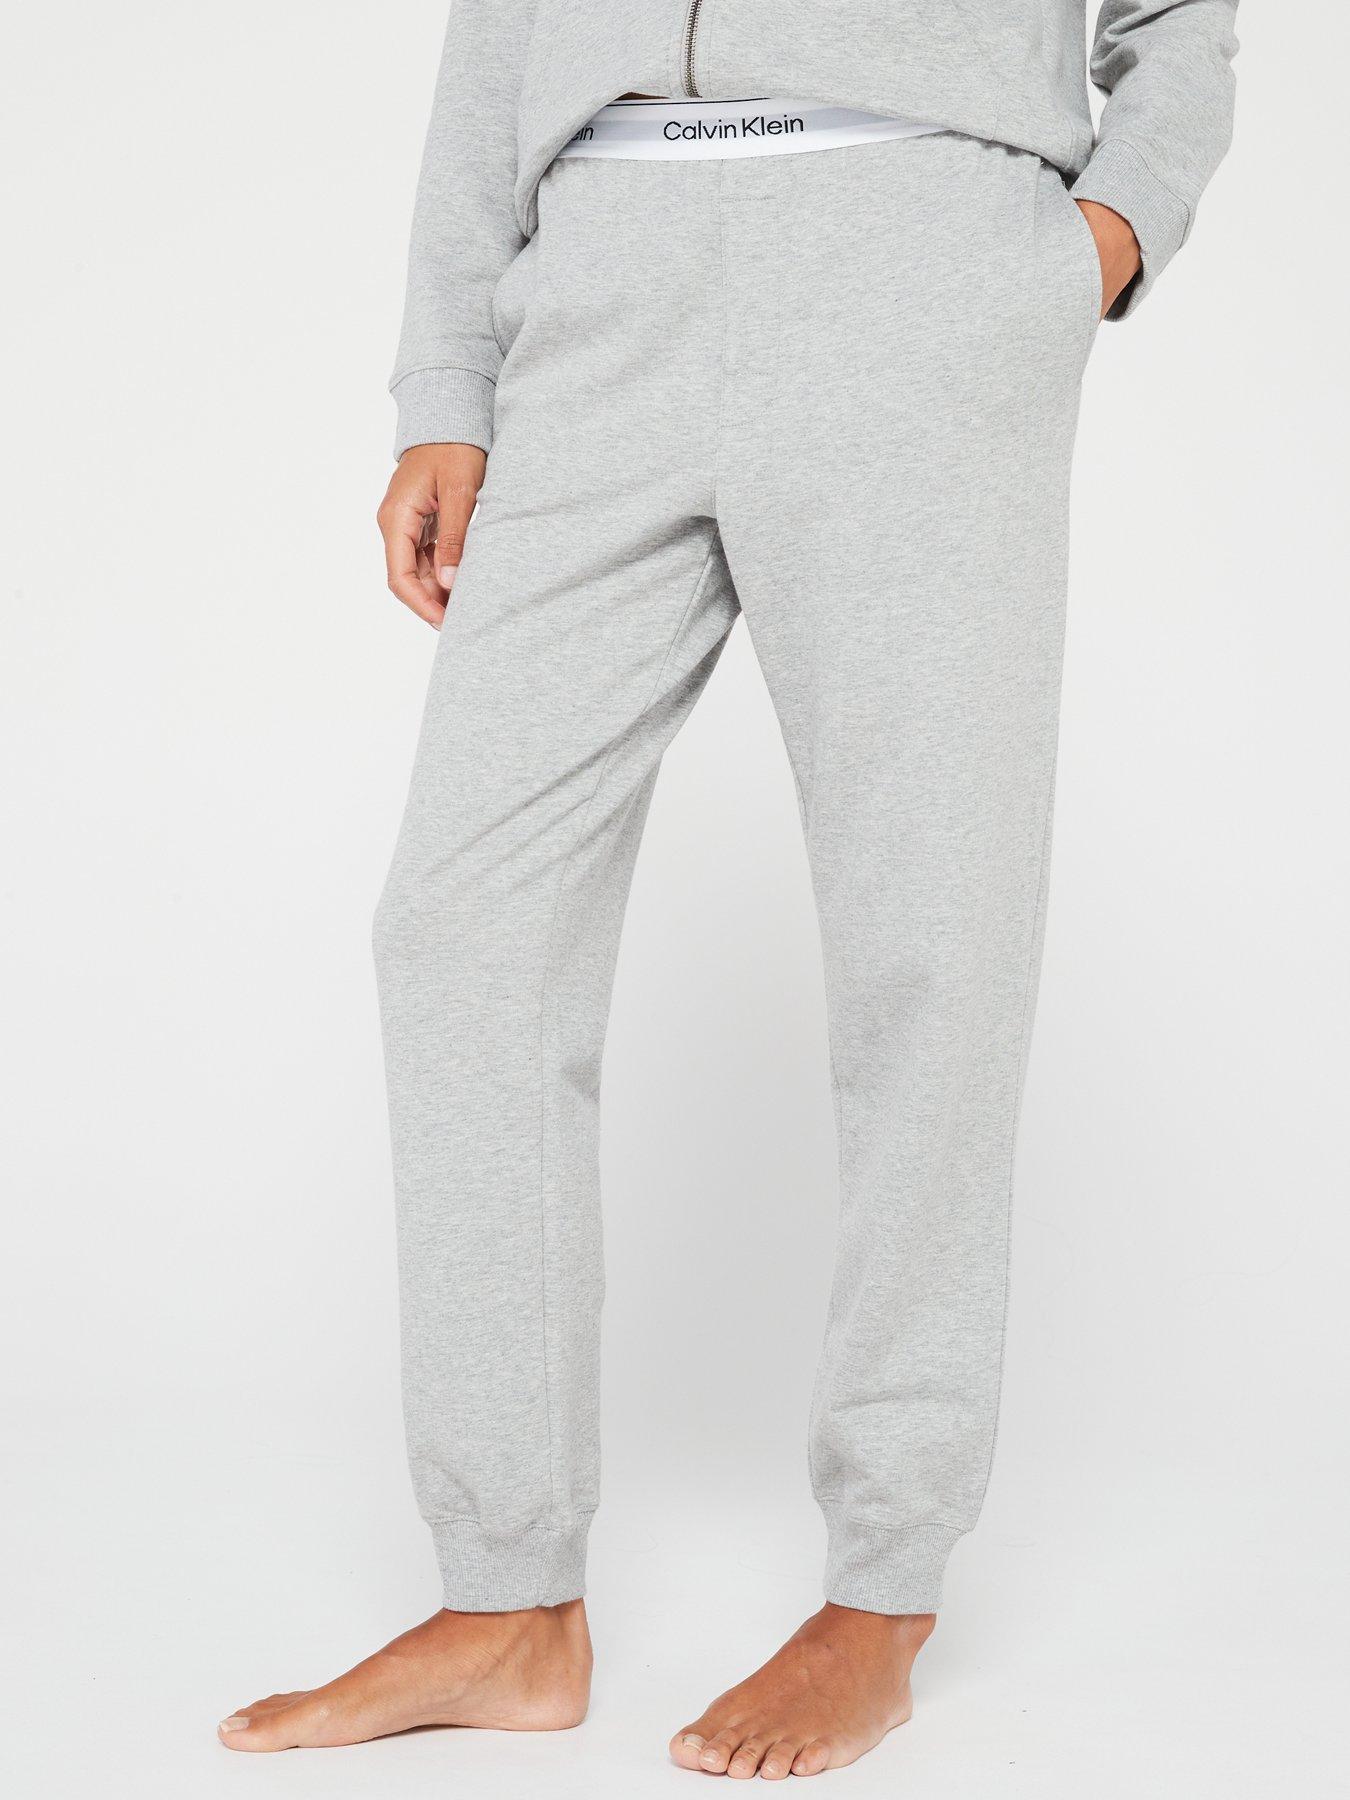 Topshop brushed ribbed sweatpants in gray heather